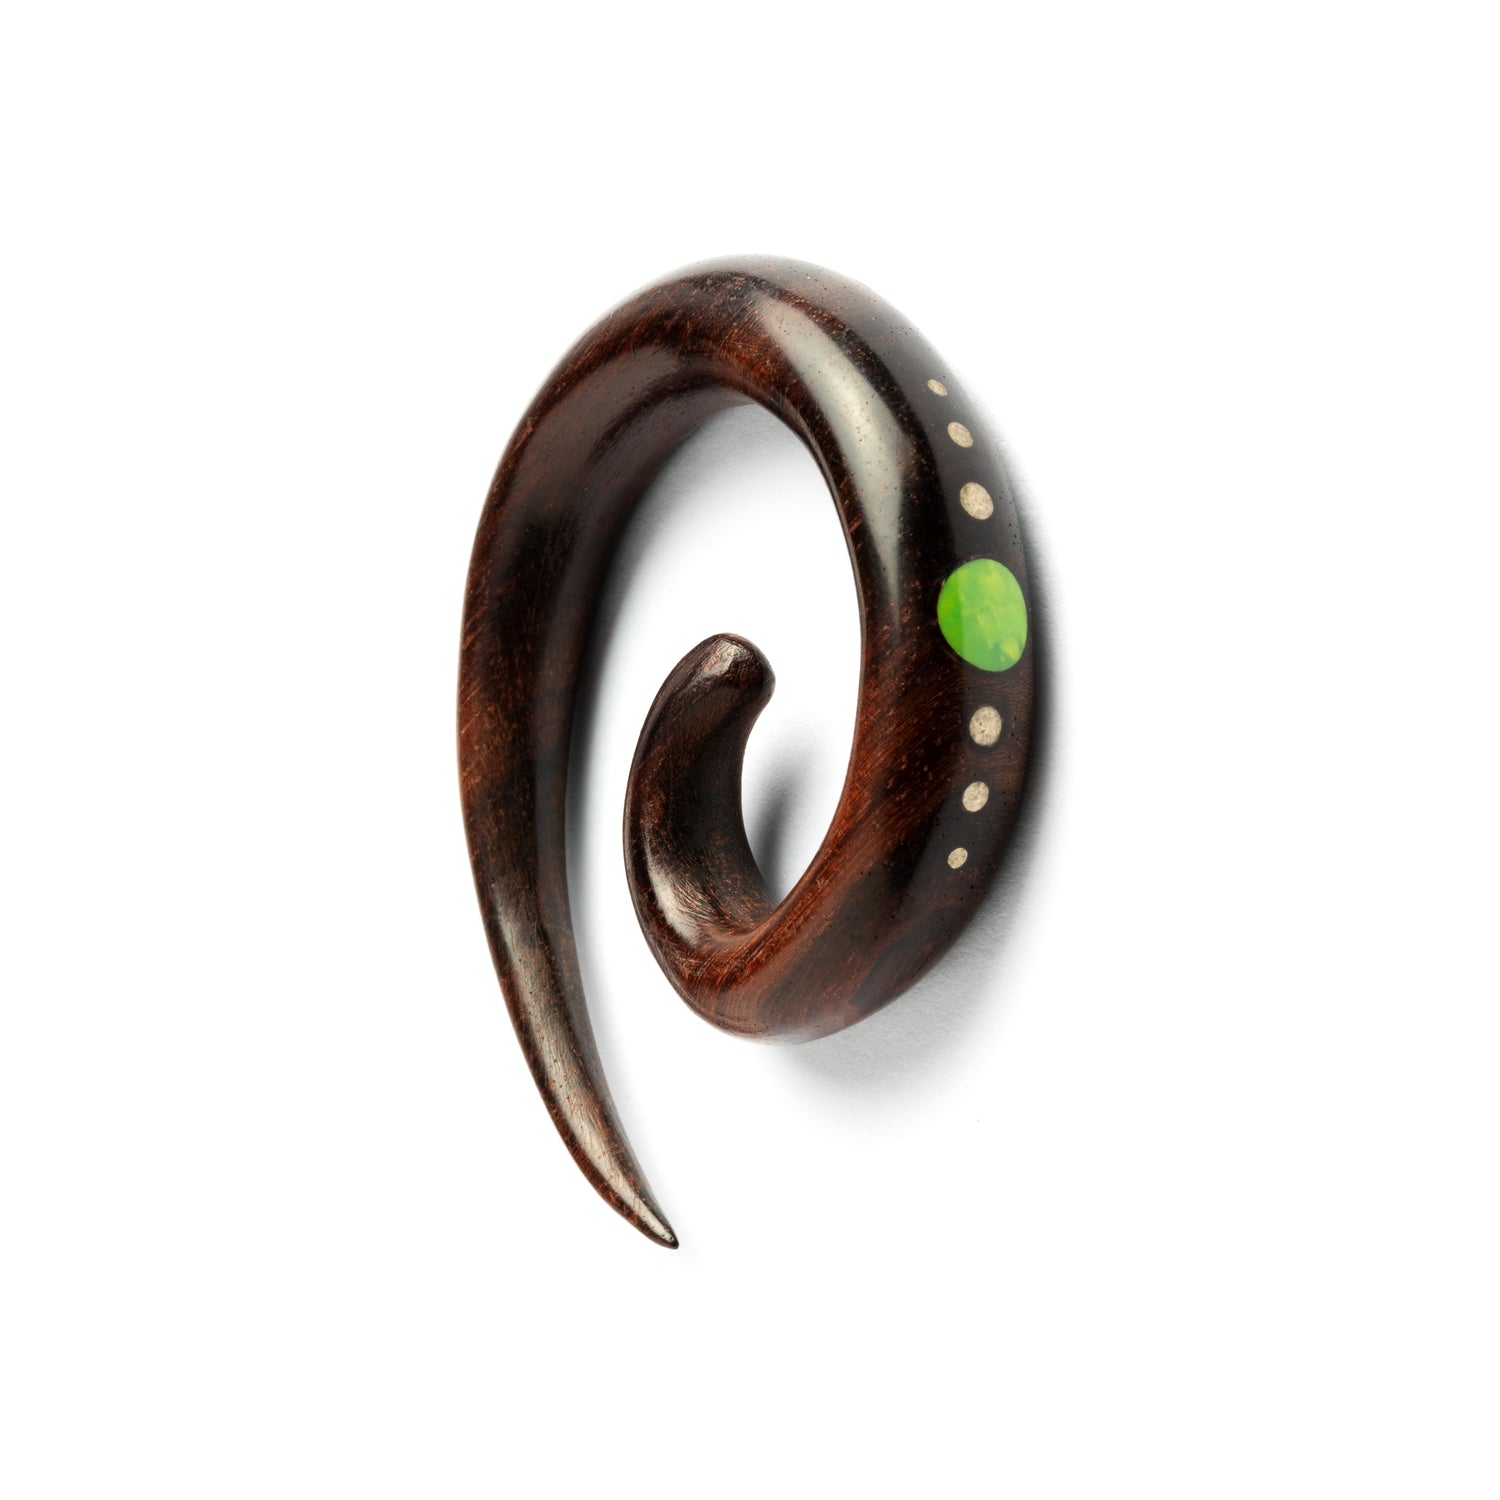 Spiral Rosewood Ear Stretcher with Stone and Silver Inlays